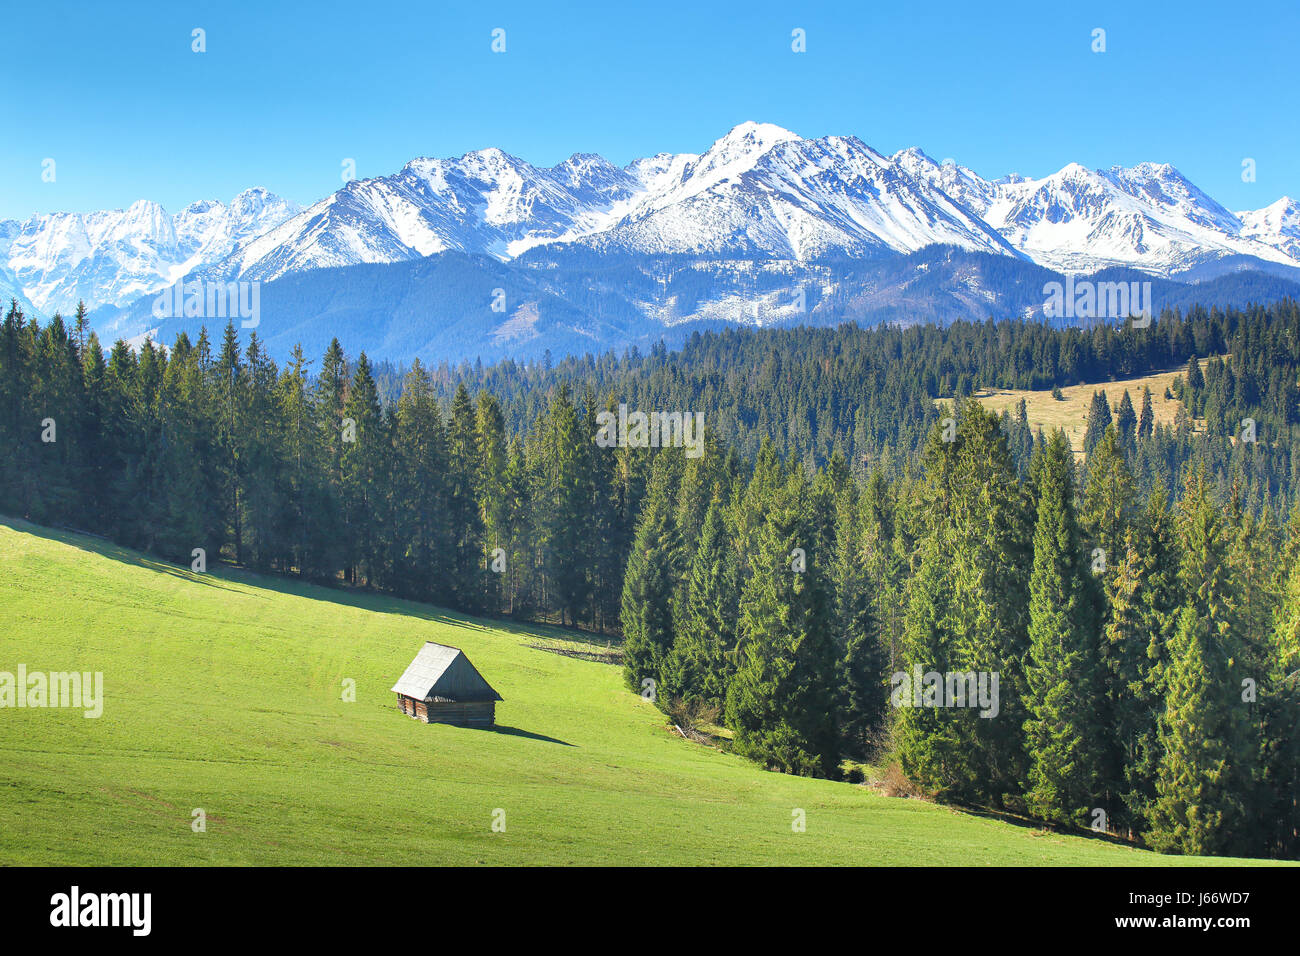 Sunny day in picturesque valley. Blue sky over white snowy mountain peaks. Green valley at Alpine foothill. Picturesque summer background. Stock Photo